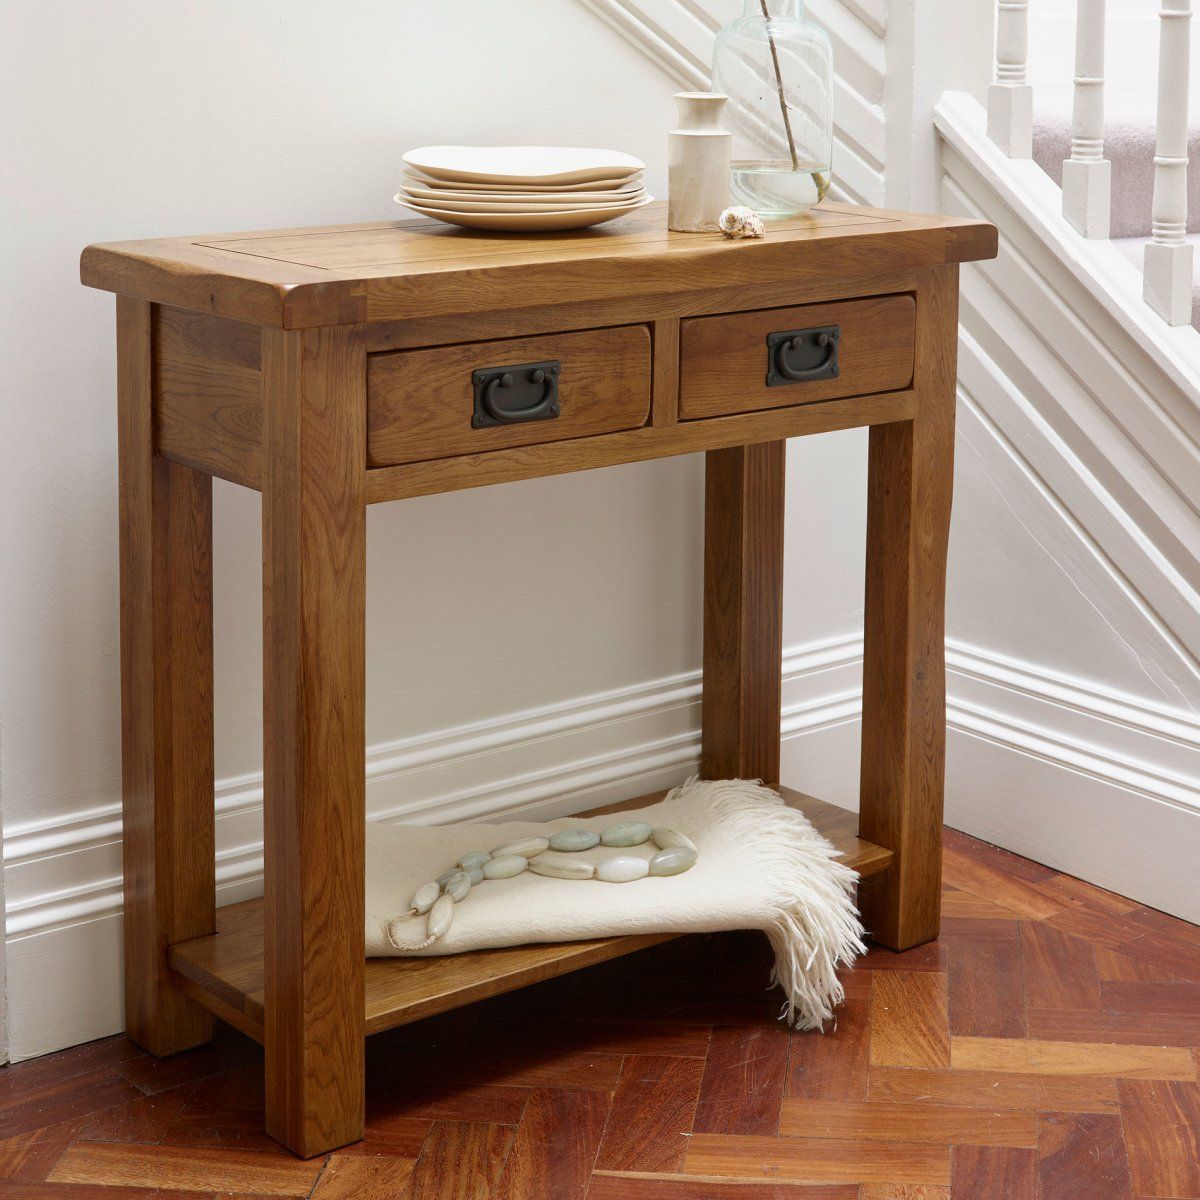 Original Rustic 2 Drawer Console Table In Solid Oak In 2 Drawer Console Tables (View 2 of 20)